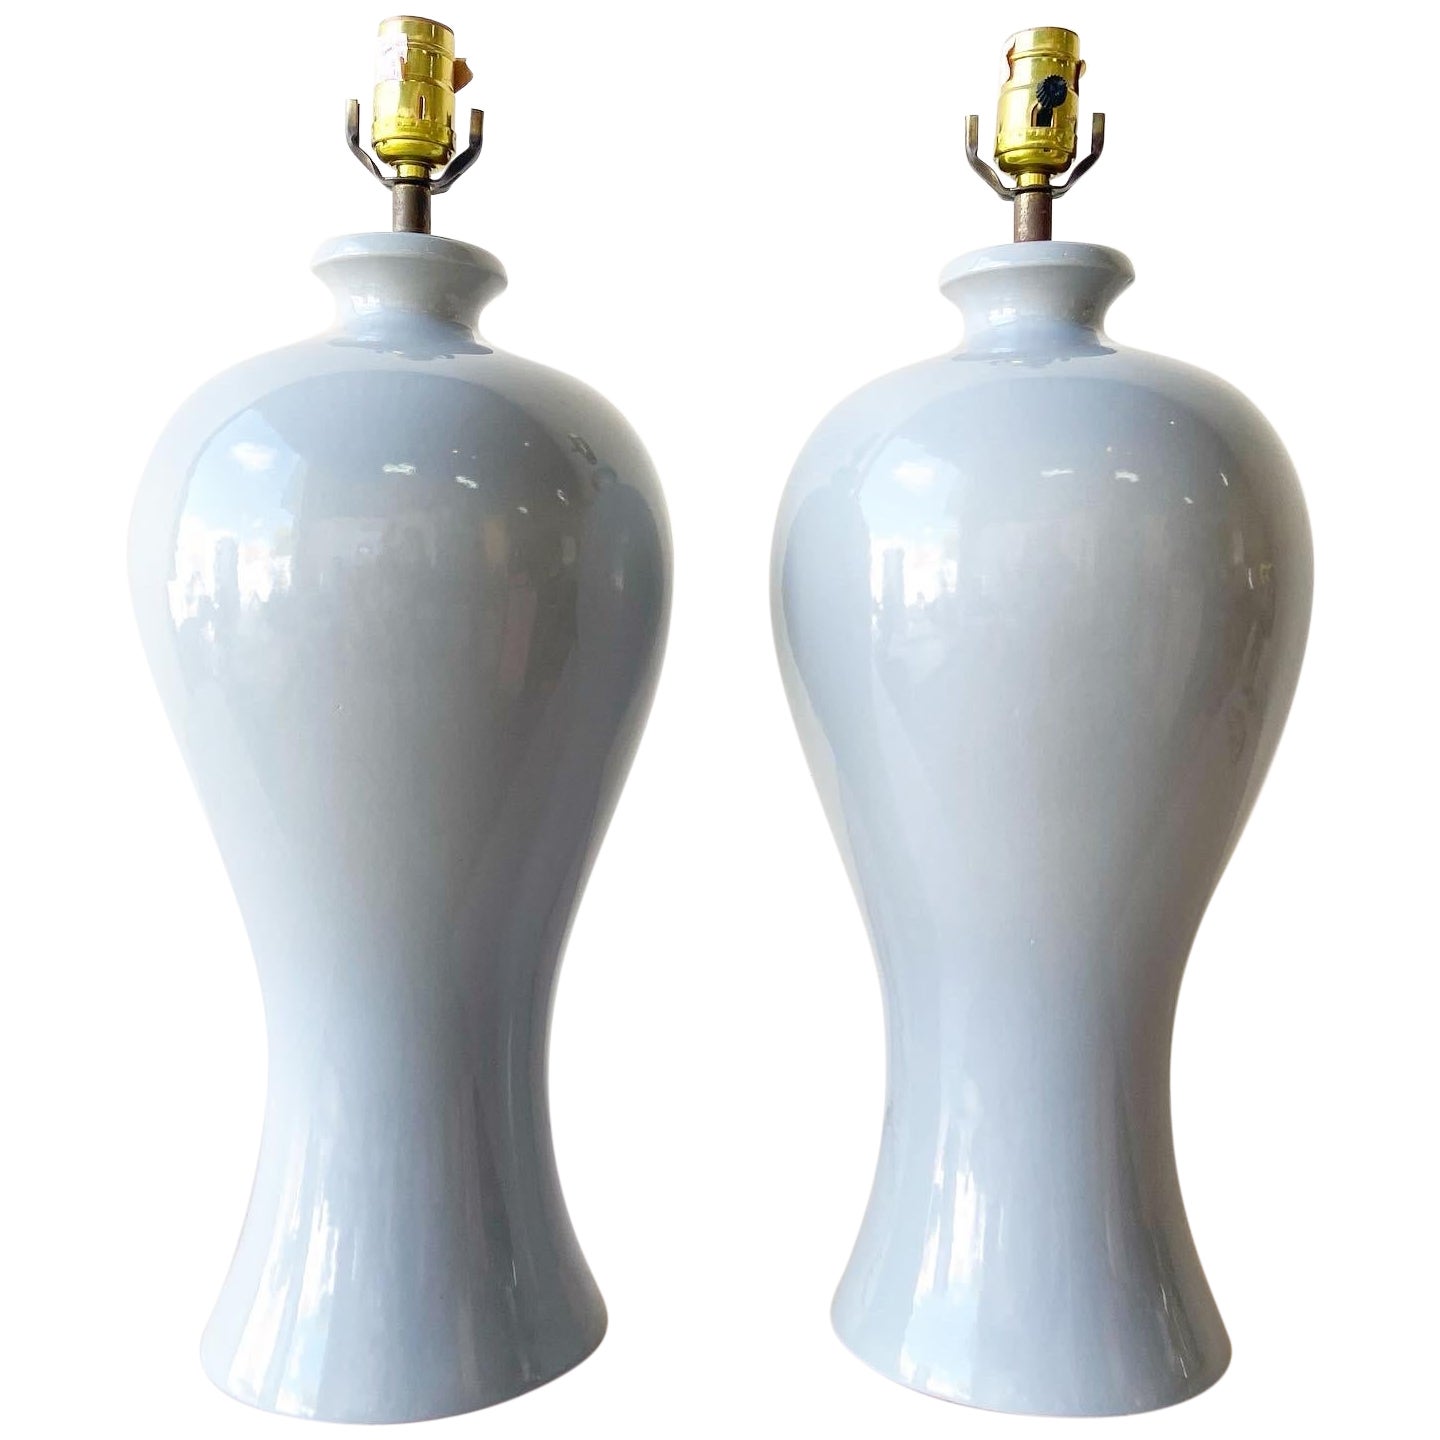 Postmodern Gray Porcelain Table Lamps – a Pair